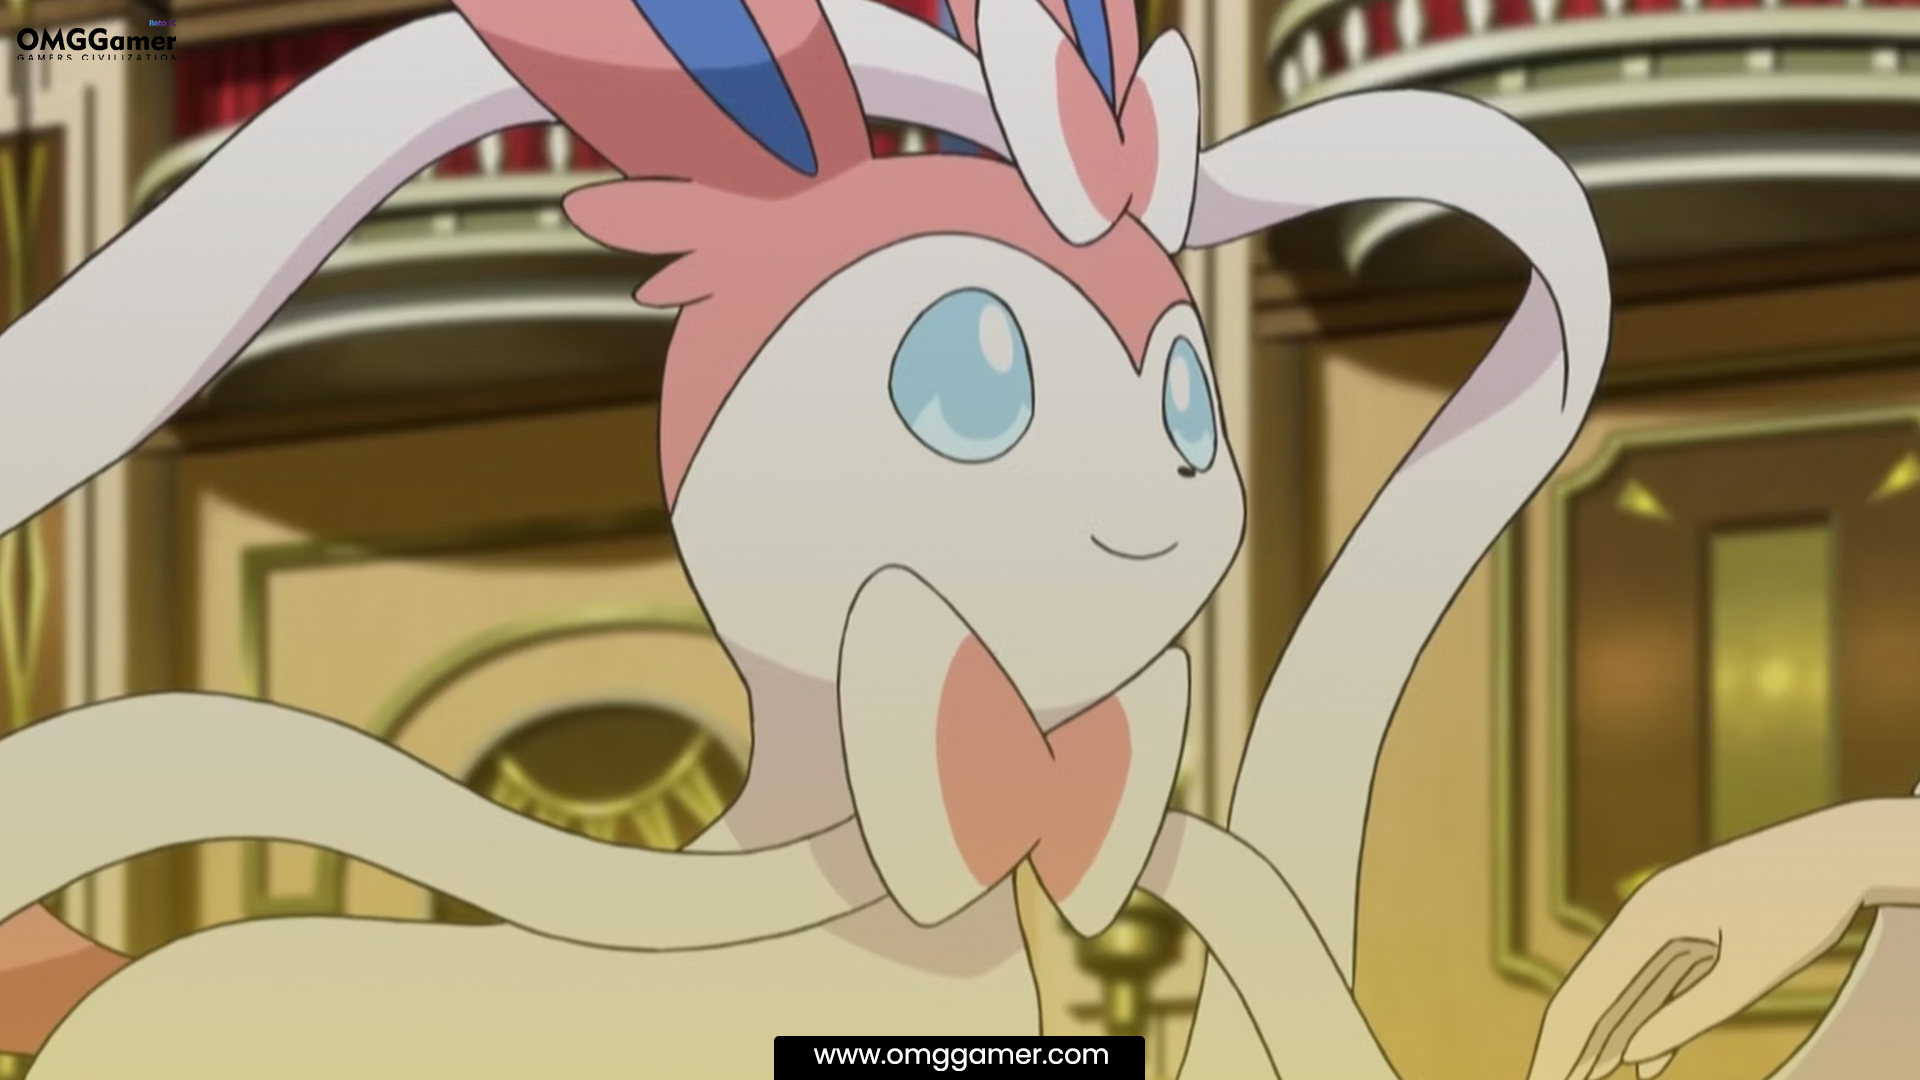 About Sylveon